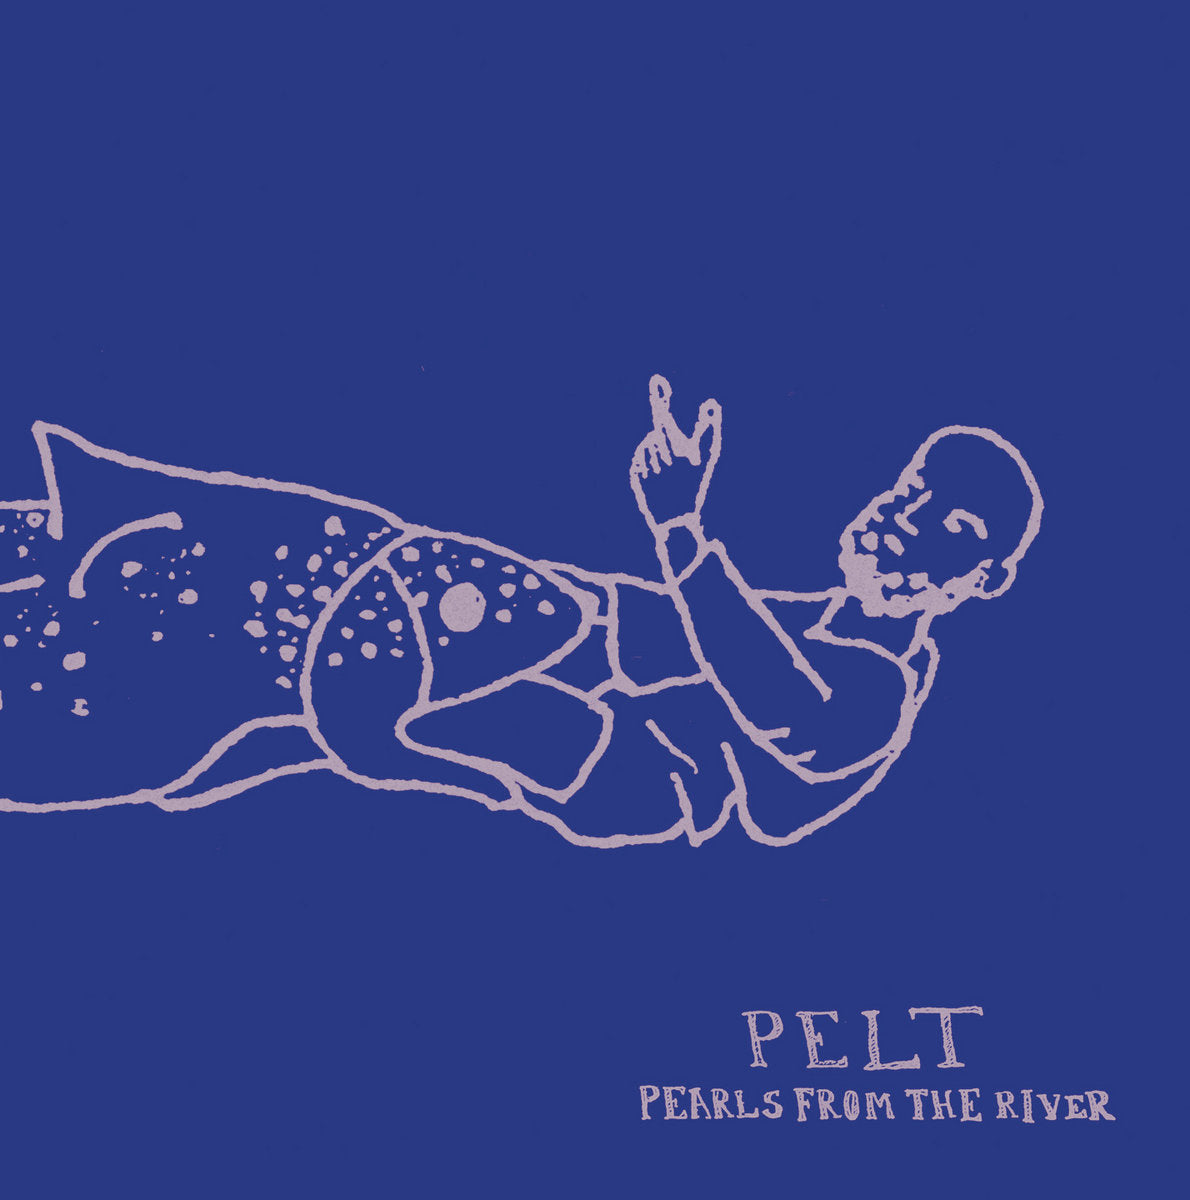 Arcade Sound - Pelt - Pearls from the River - LP image